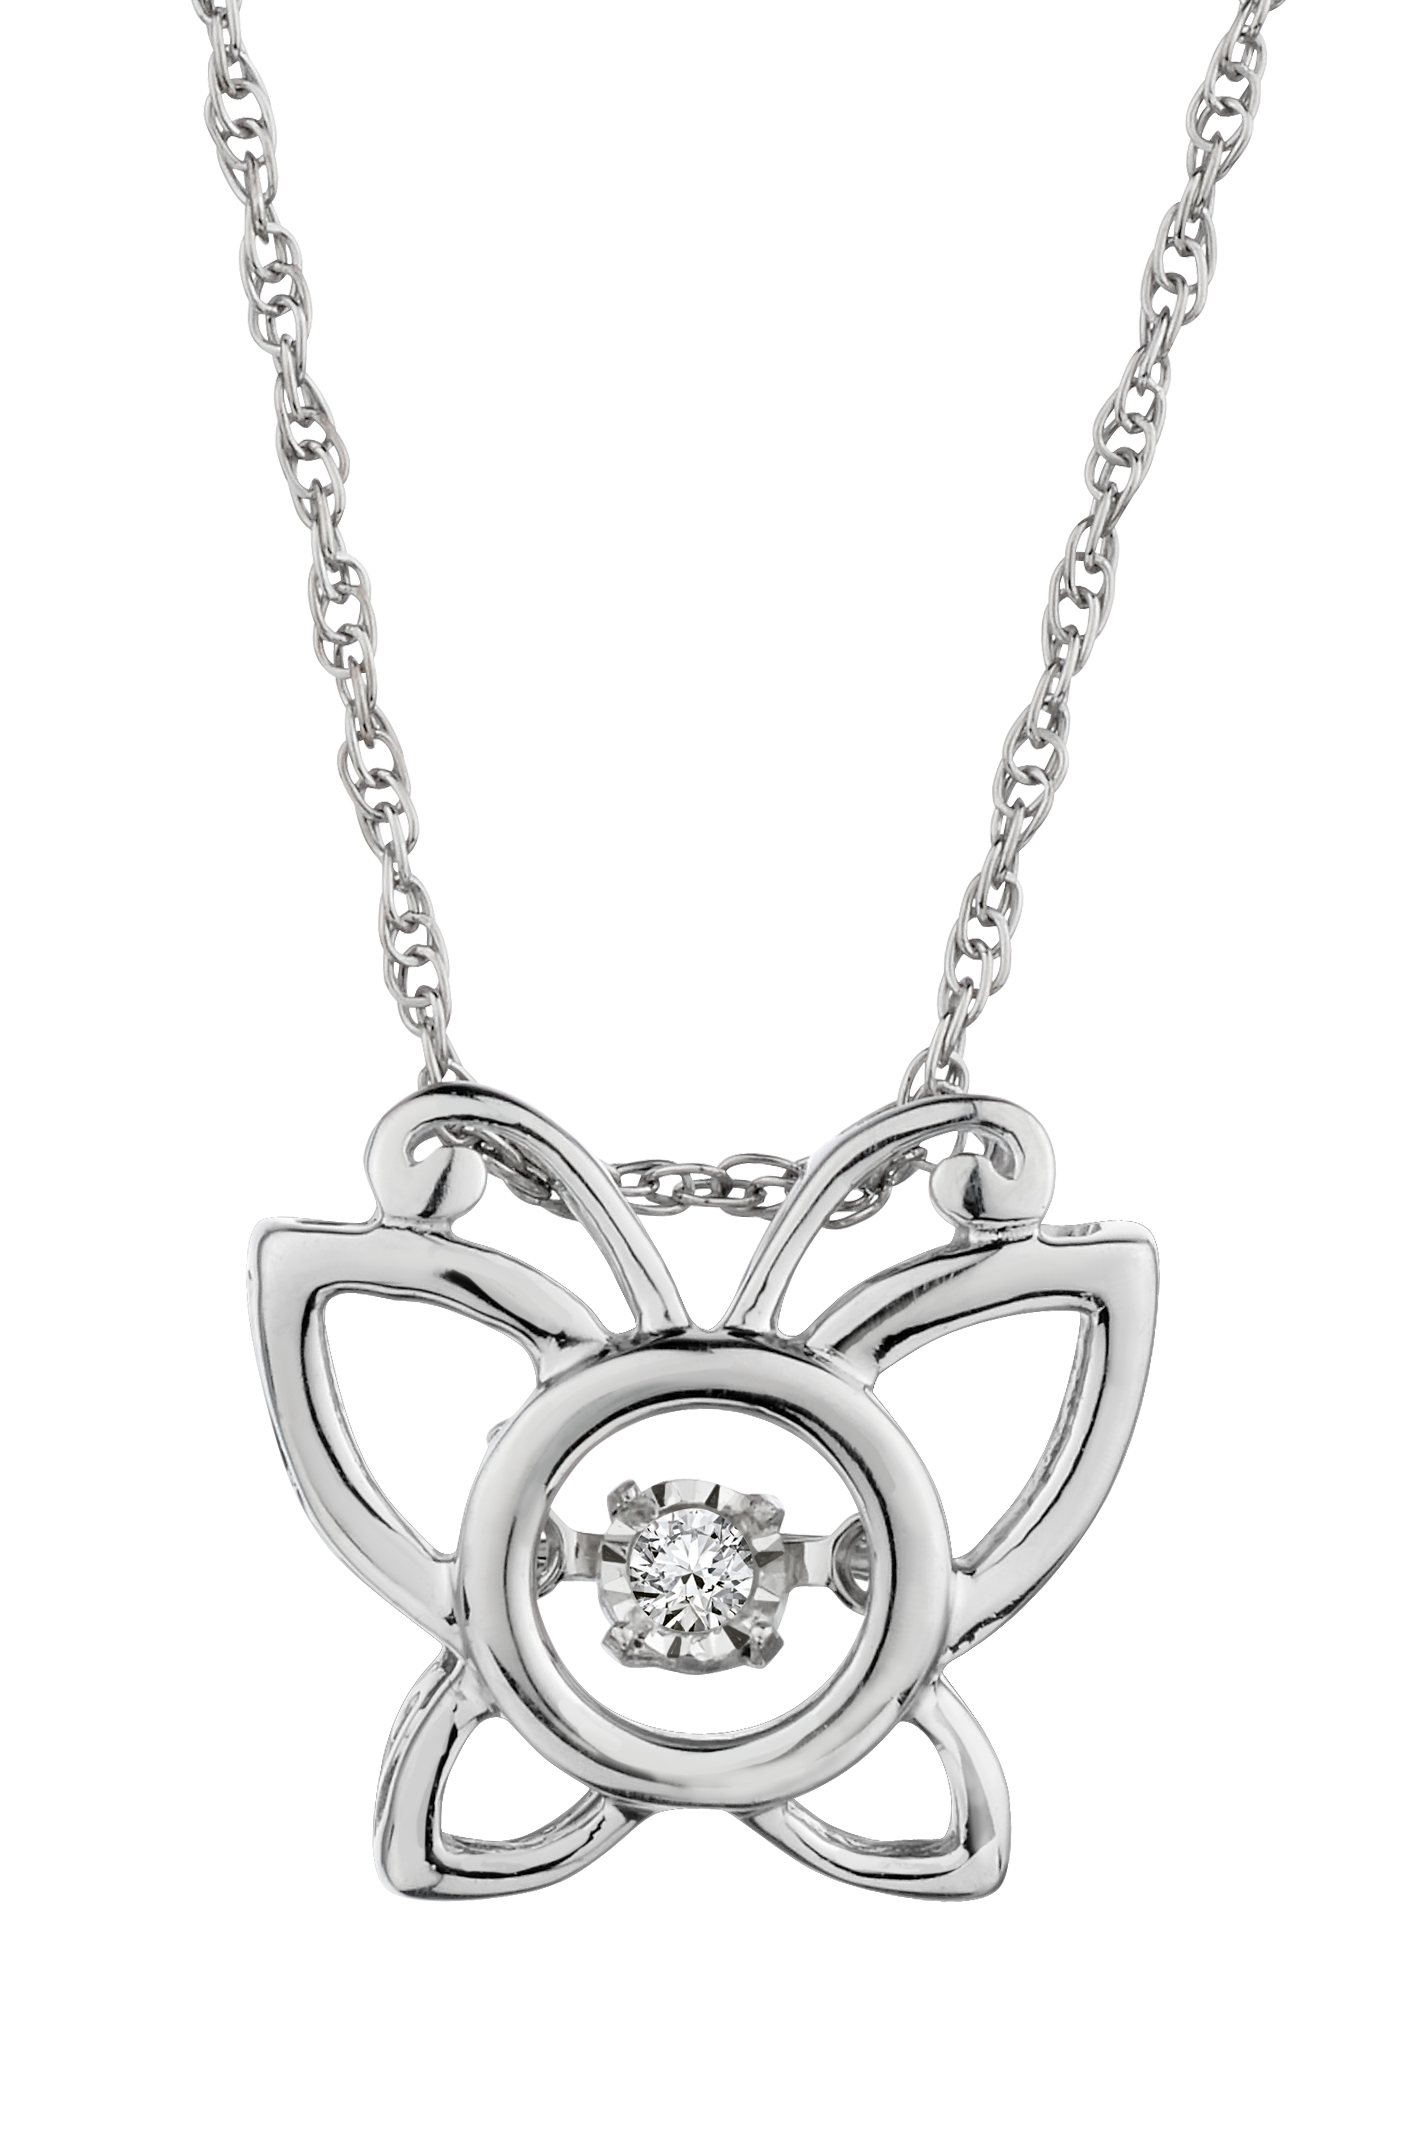 .025 Carat of Diamond "Shimmer" Butterfly Pendant, Silver.....................NOW